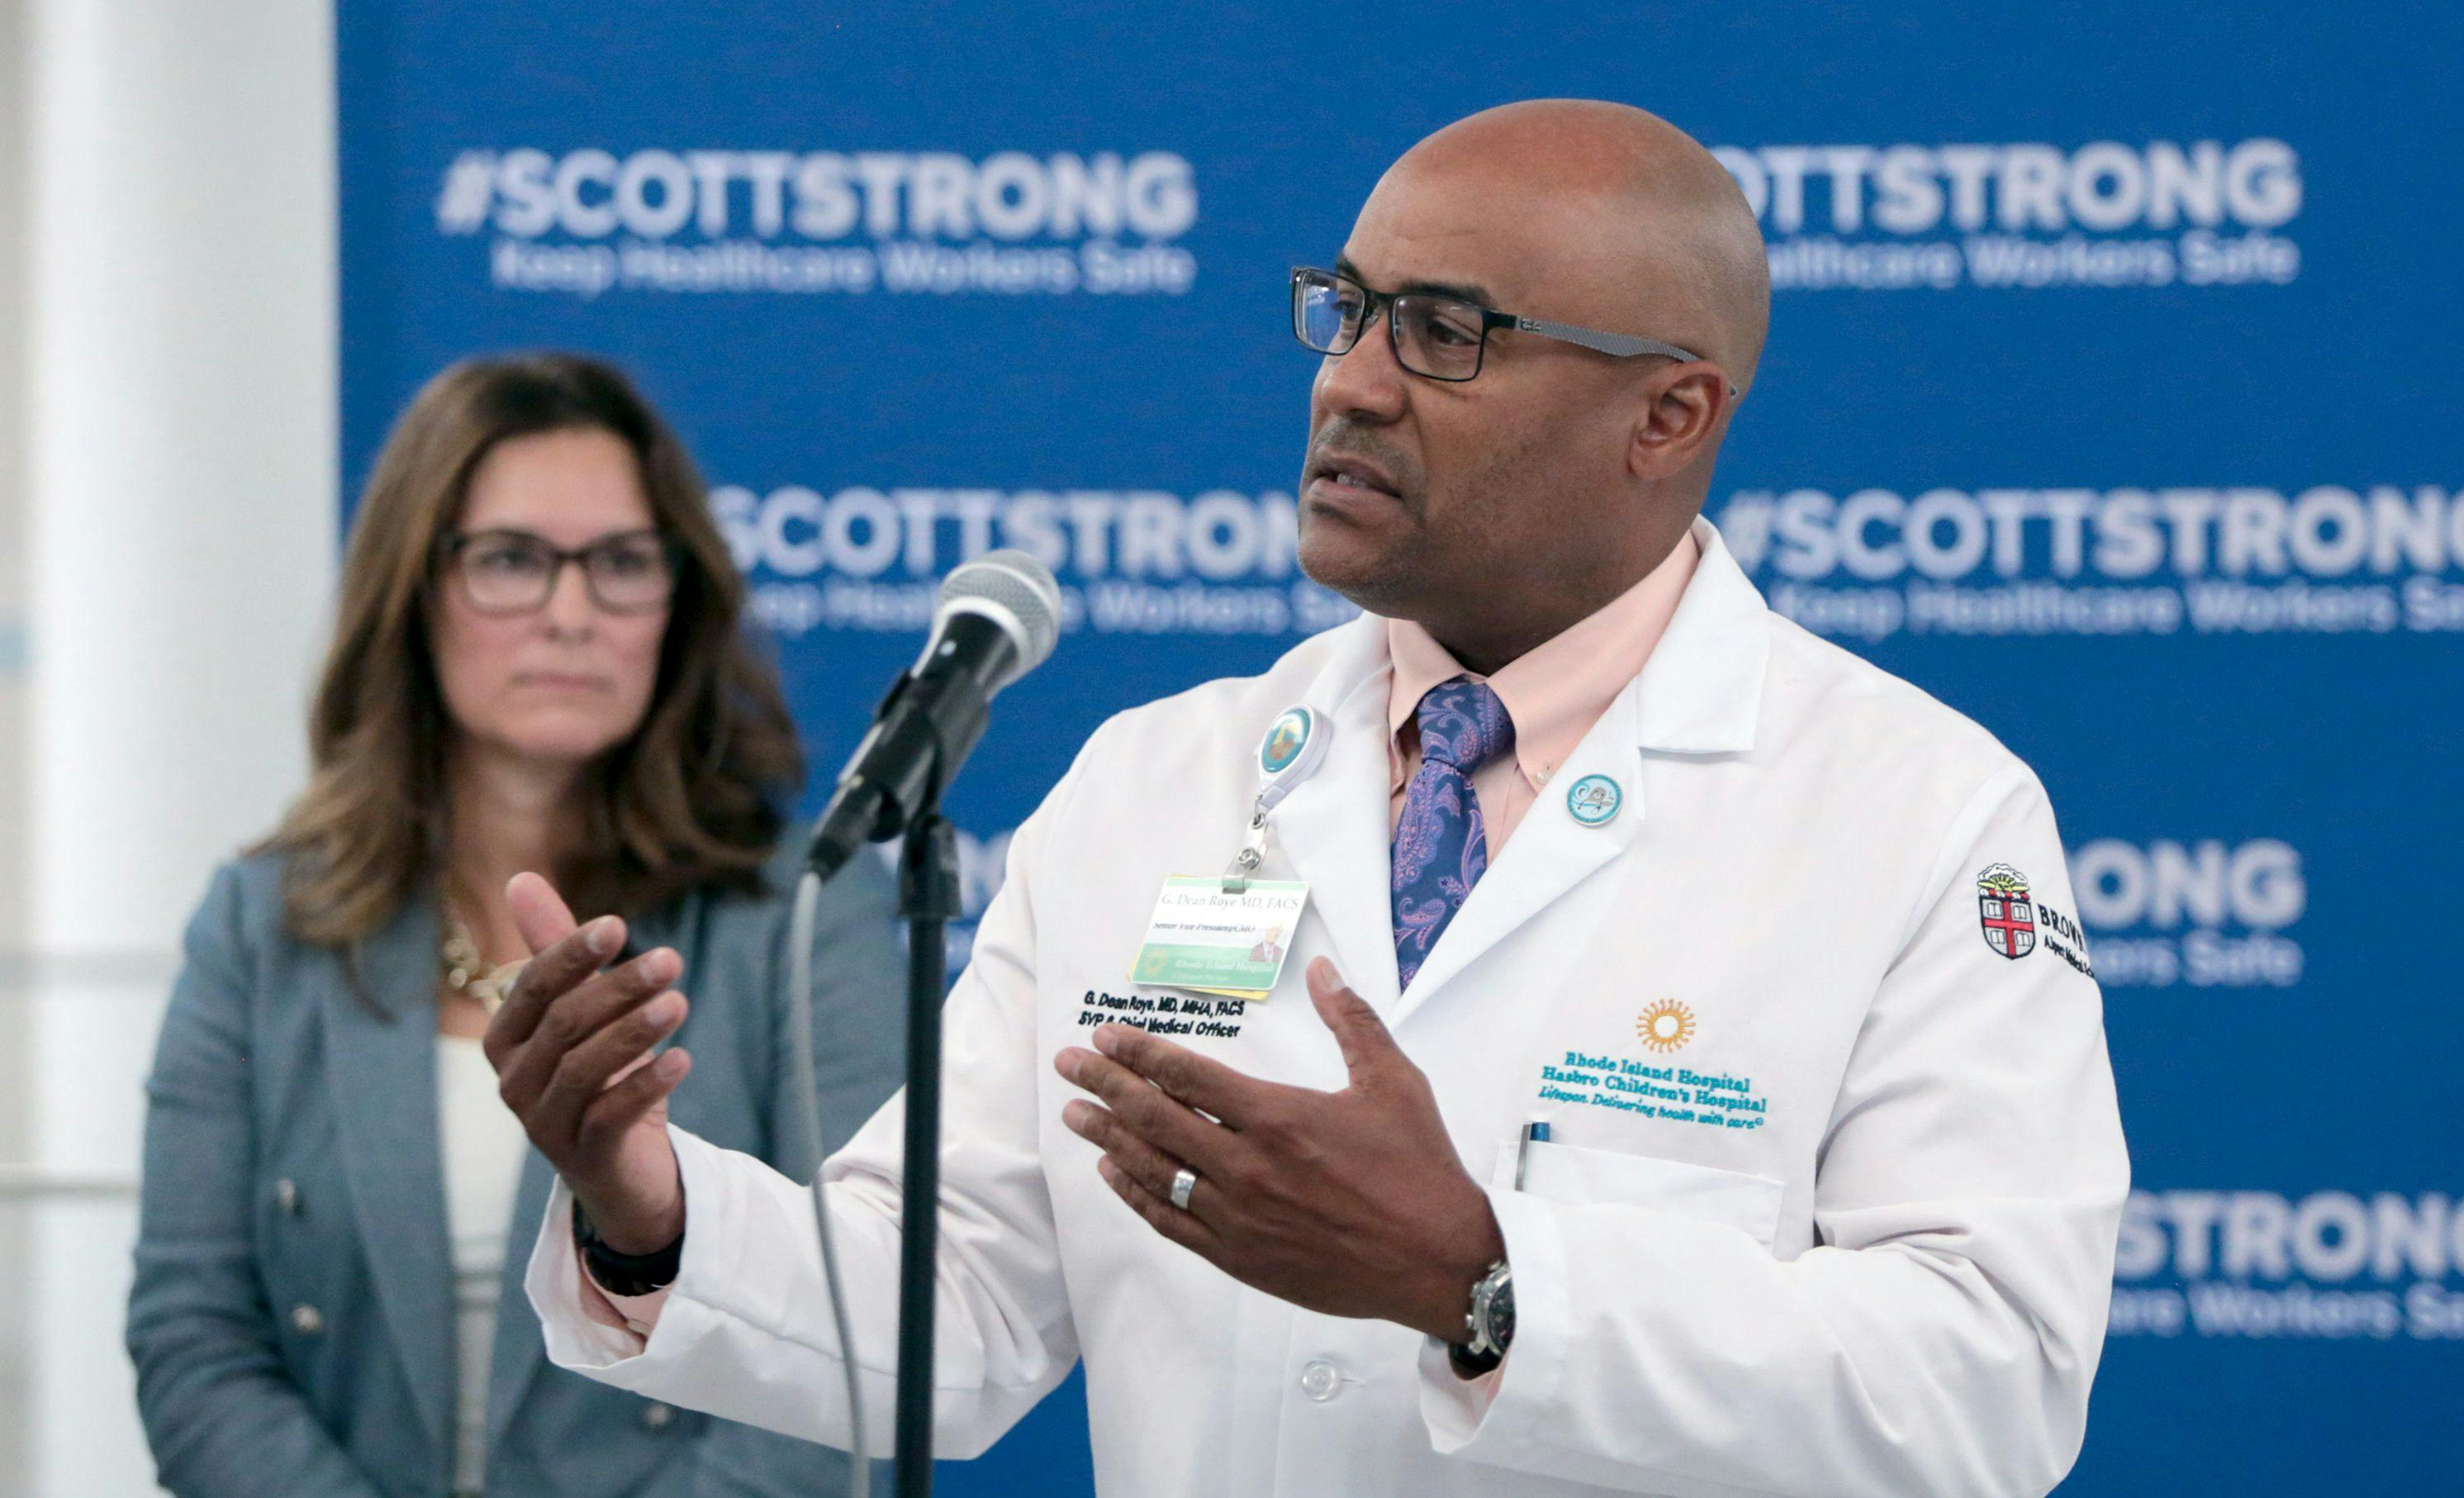 G. Dean Roye, senior vice president for medical affairs and chief medical officer at Rhode Island Hospital, talks at an event to kick off the "ScottStrong" campaign to protect healthcare workers from violence. (Photo by Bill Murphy at Lifespan)